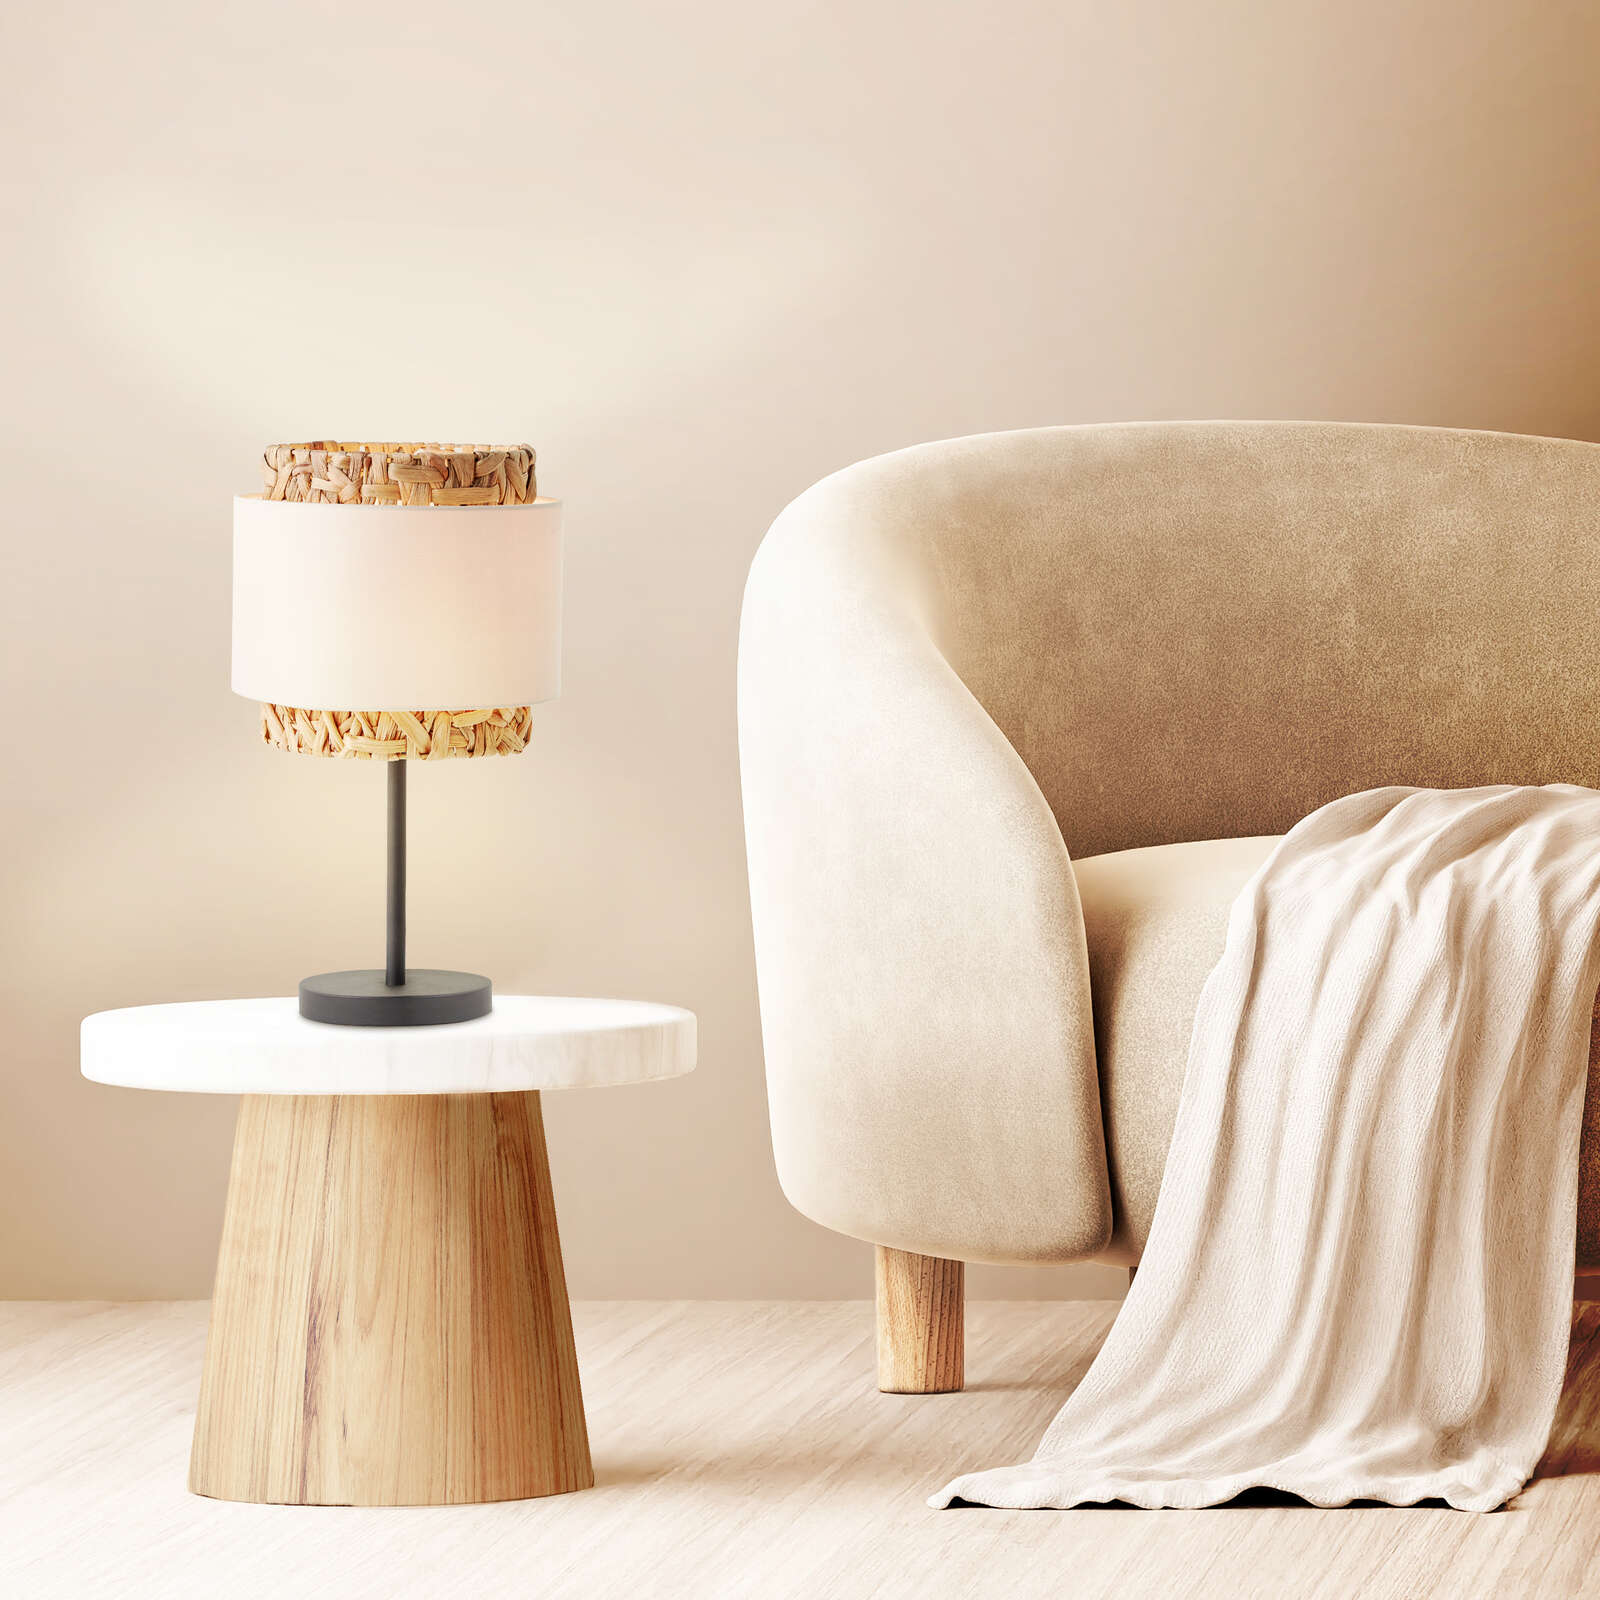             Textile table lamp - Till 1 - Brown
        